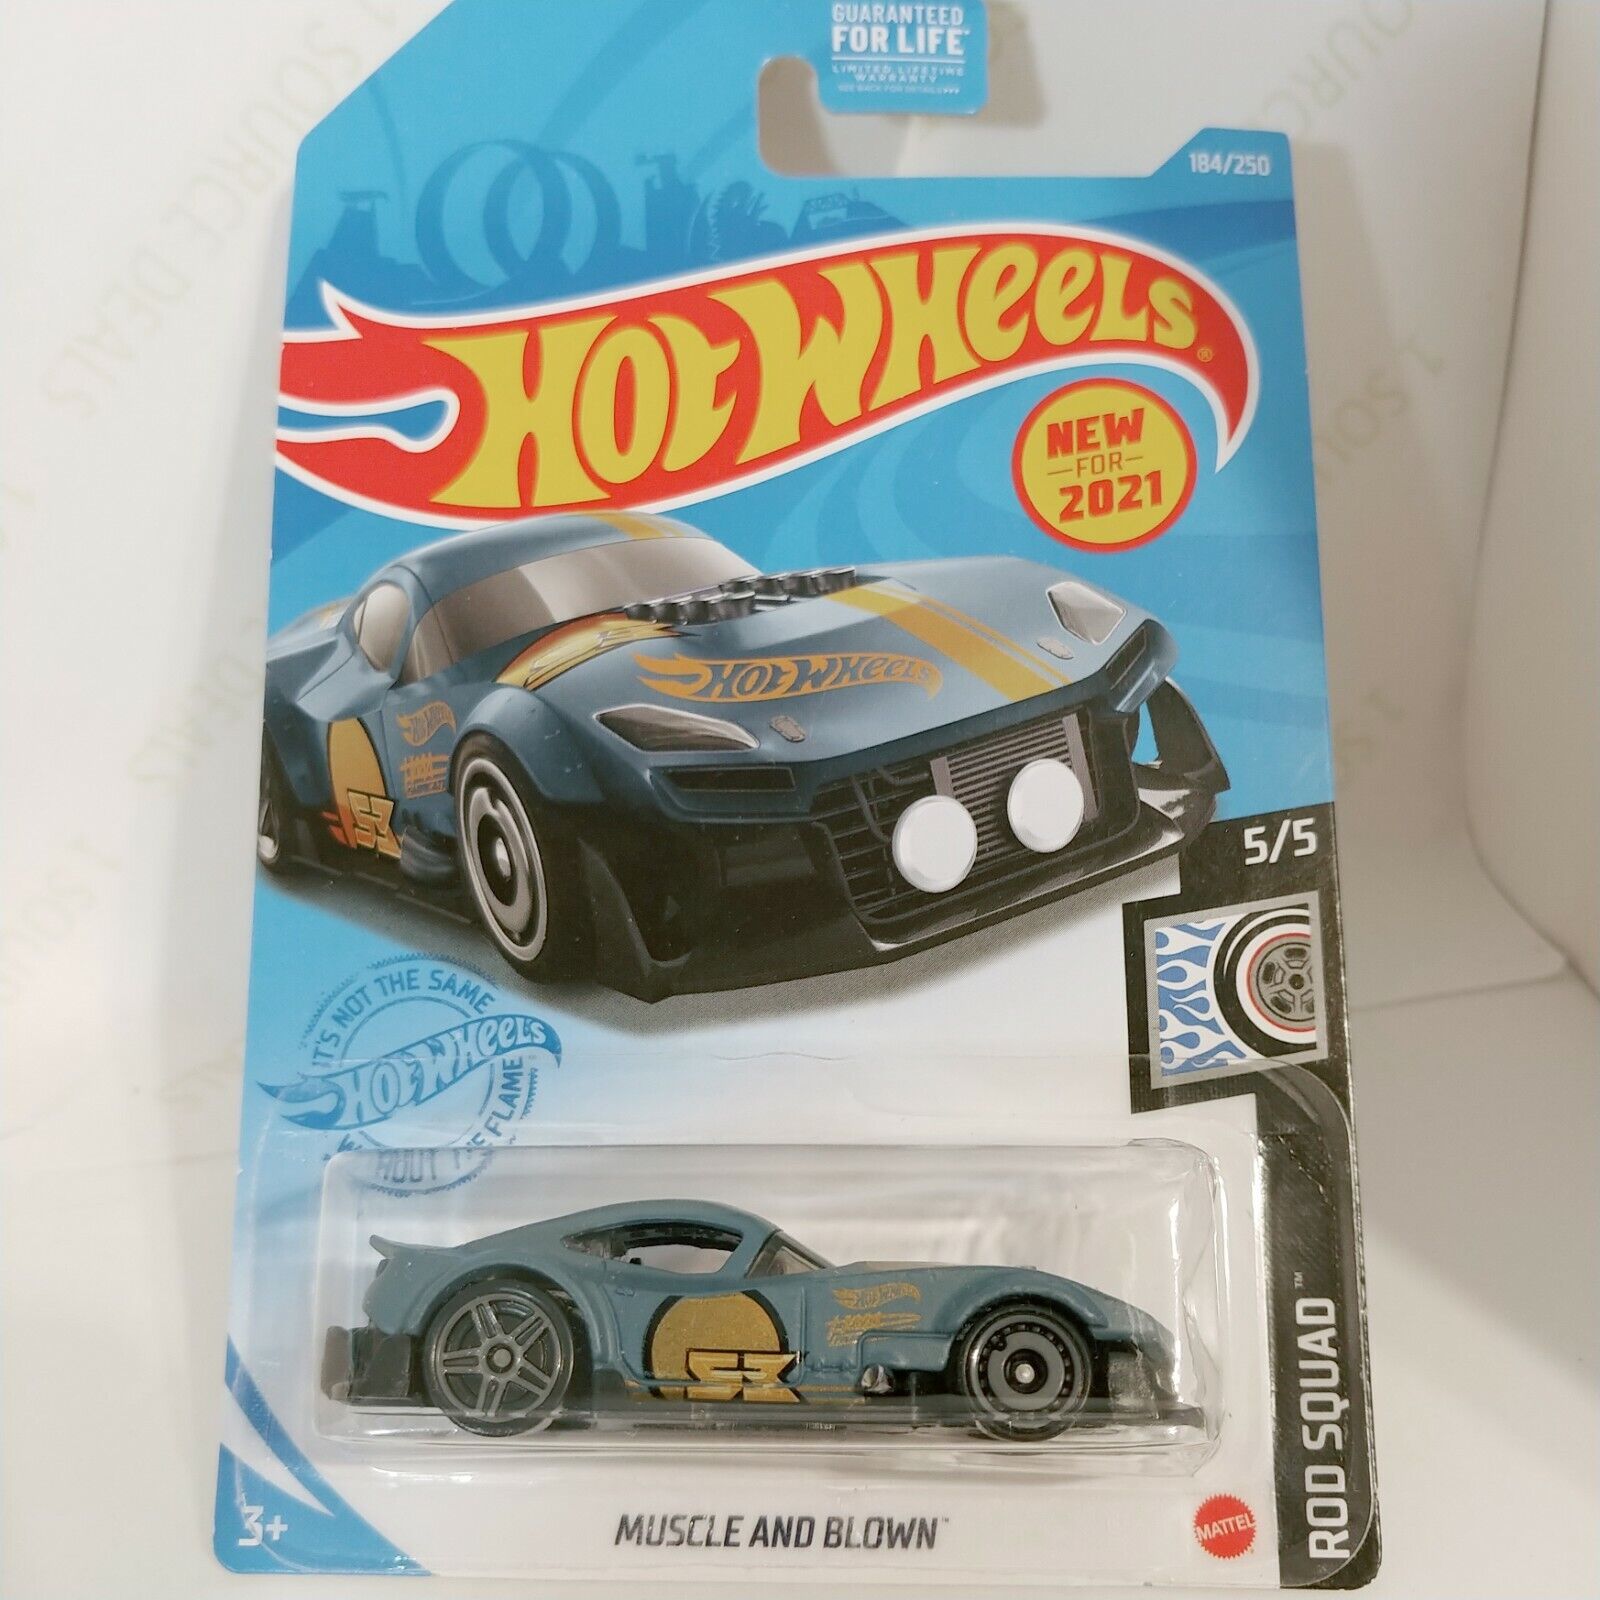 Make:#184 Muscle and Blown (5/5 Rod Squad):2021 Hot Wheels Cars Main Line Series Newest Cases You Pick Brand New Hot Wheels